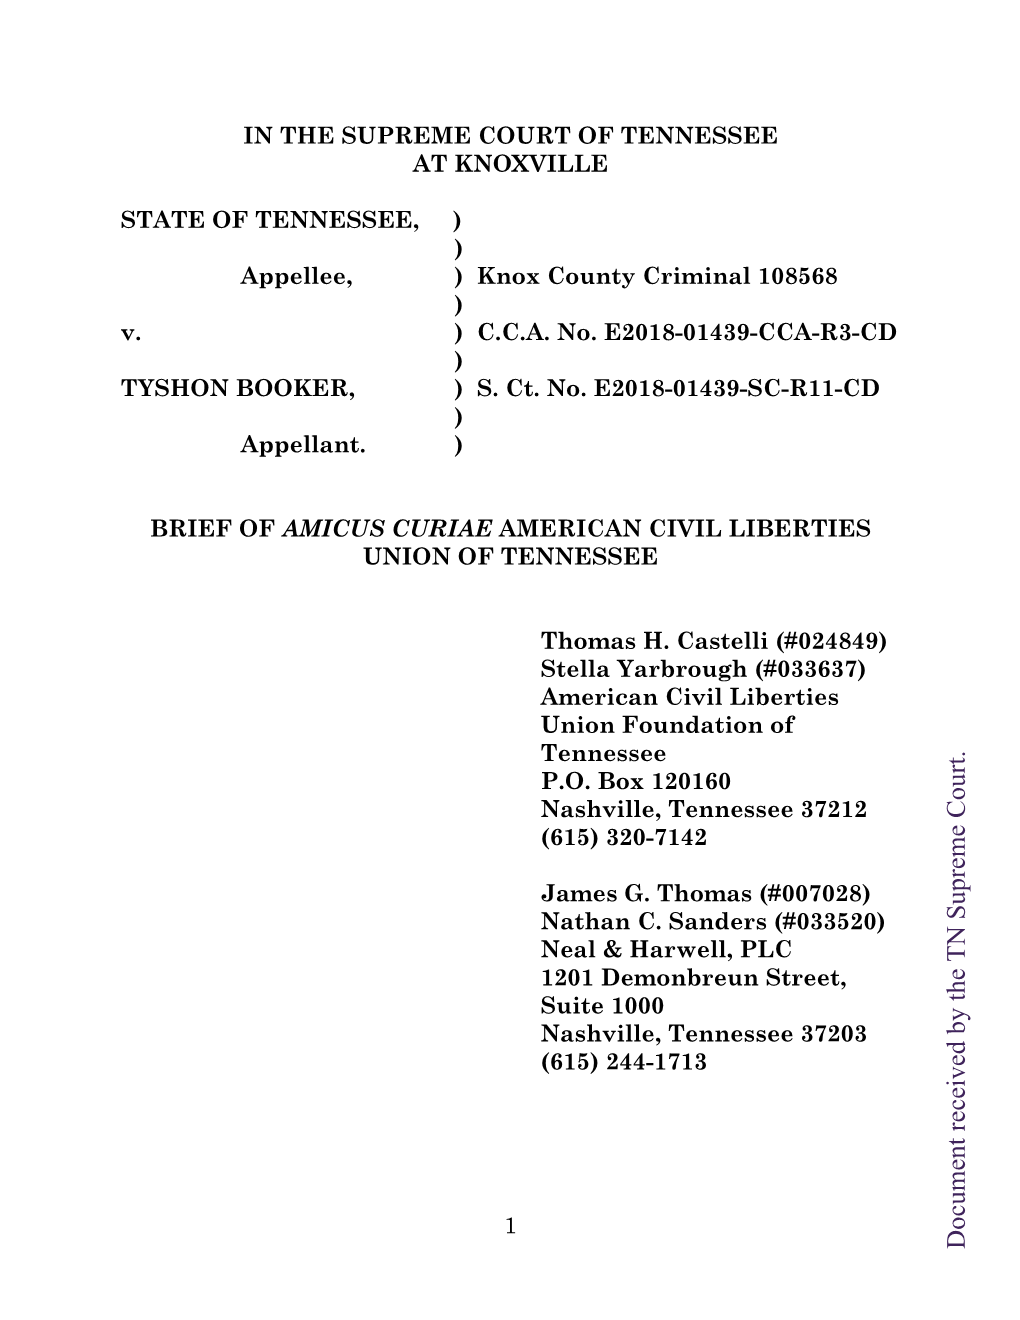 Document Received by the TN Supreme Court